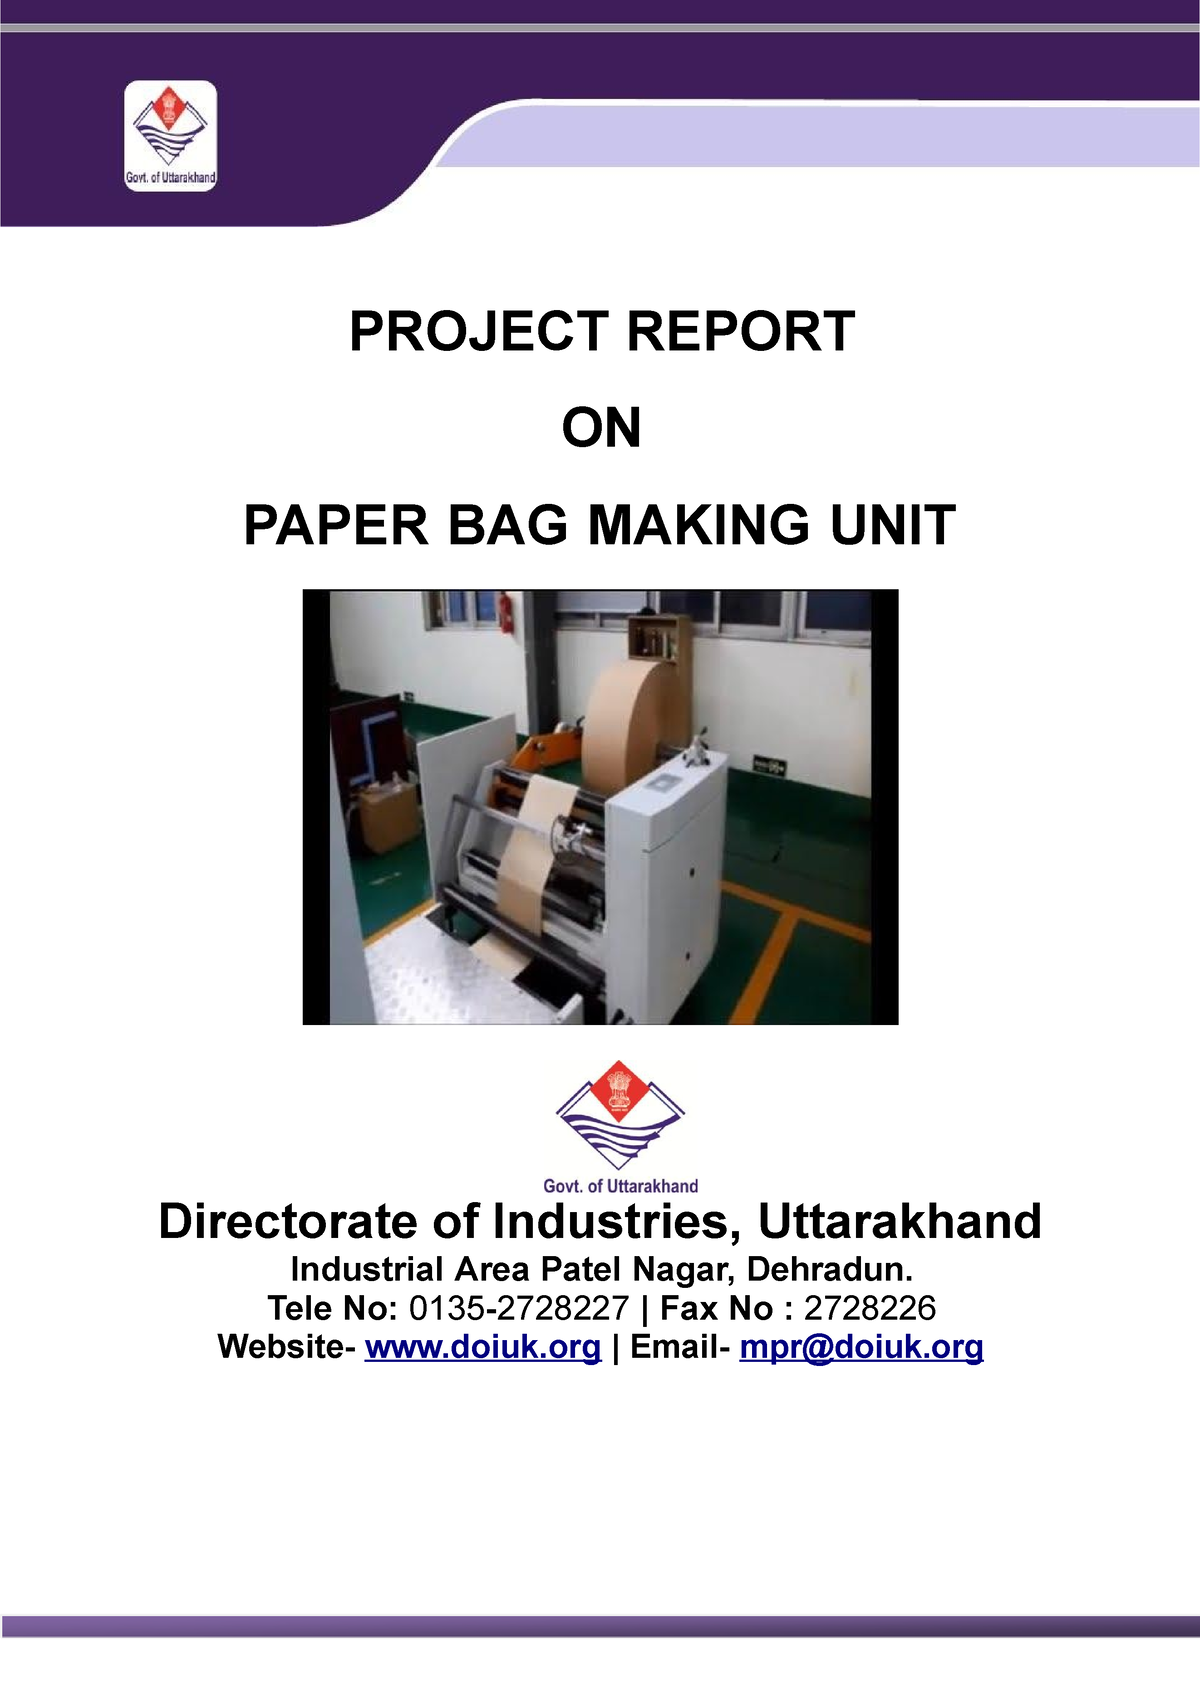 PROJECT ON PAPER BAG INDUSTRY | PPT